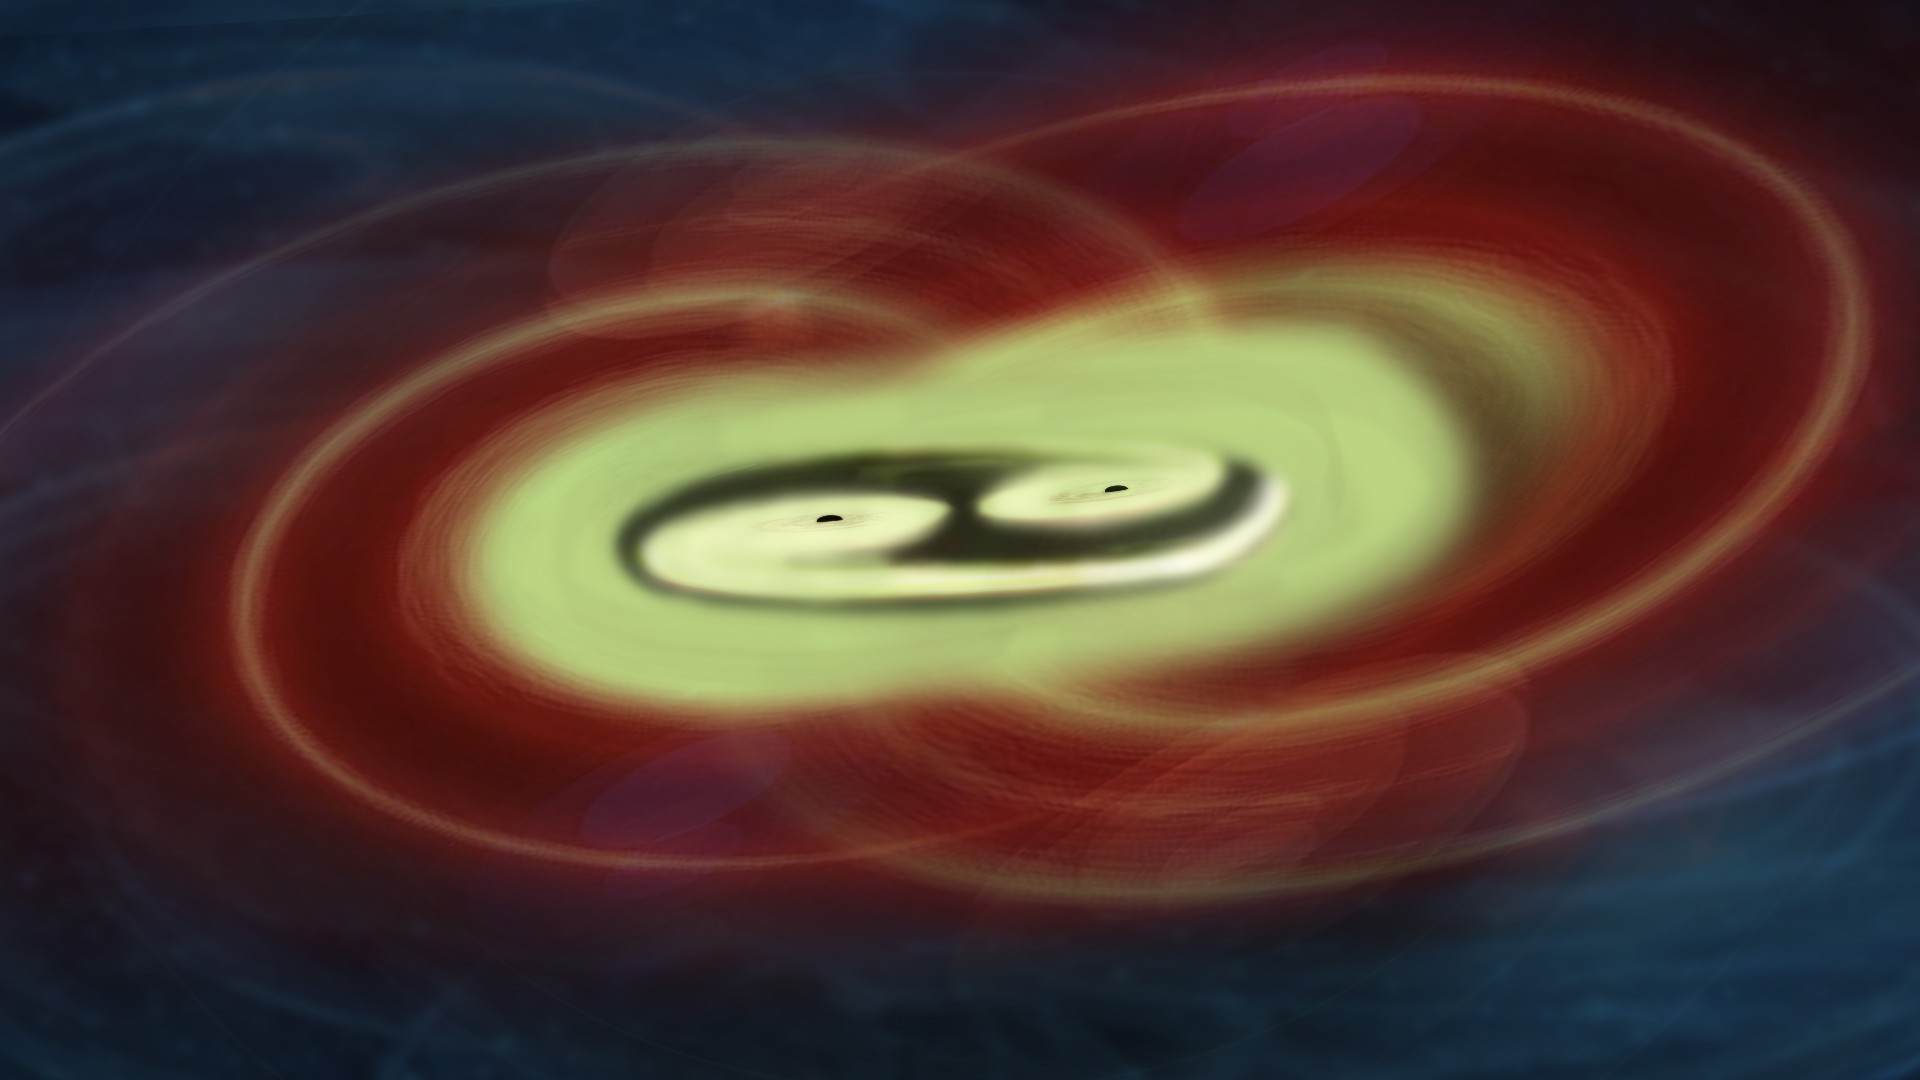 A visualization of two merging supermassive black holes